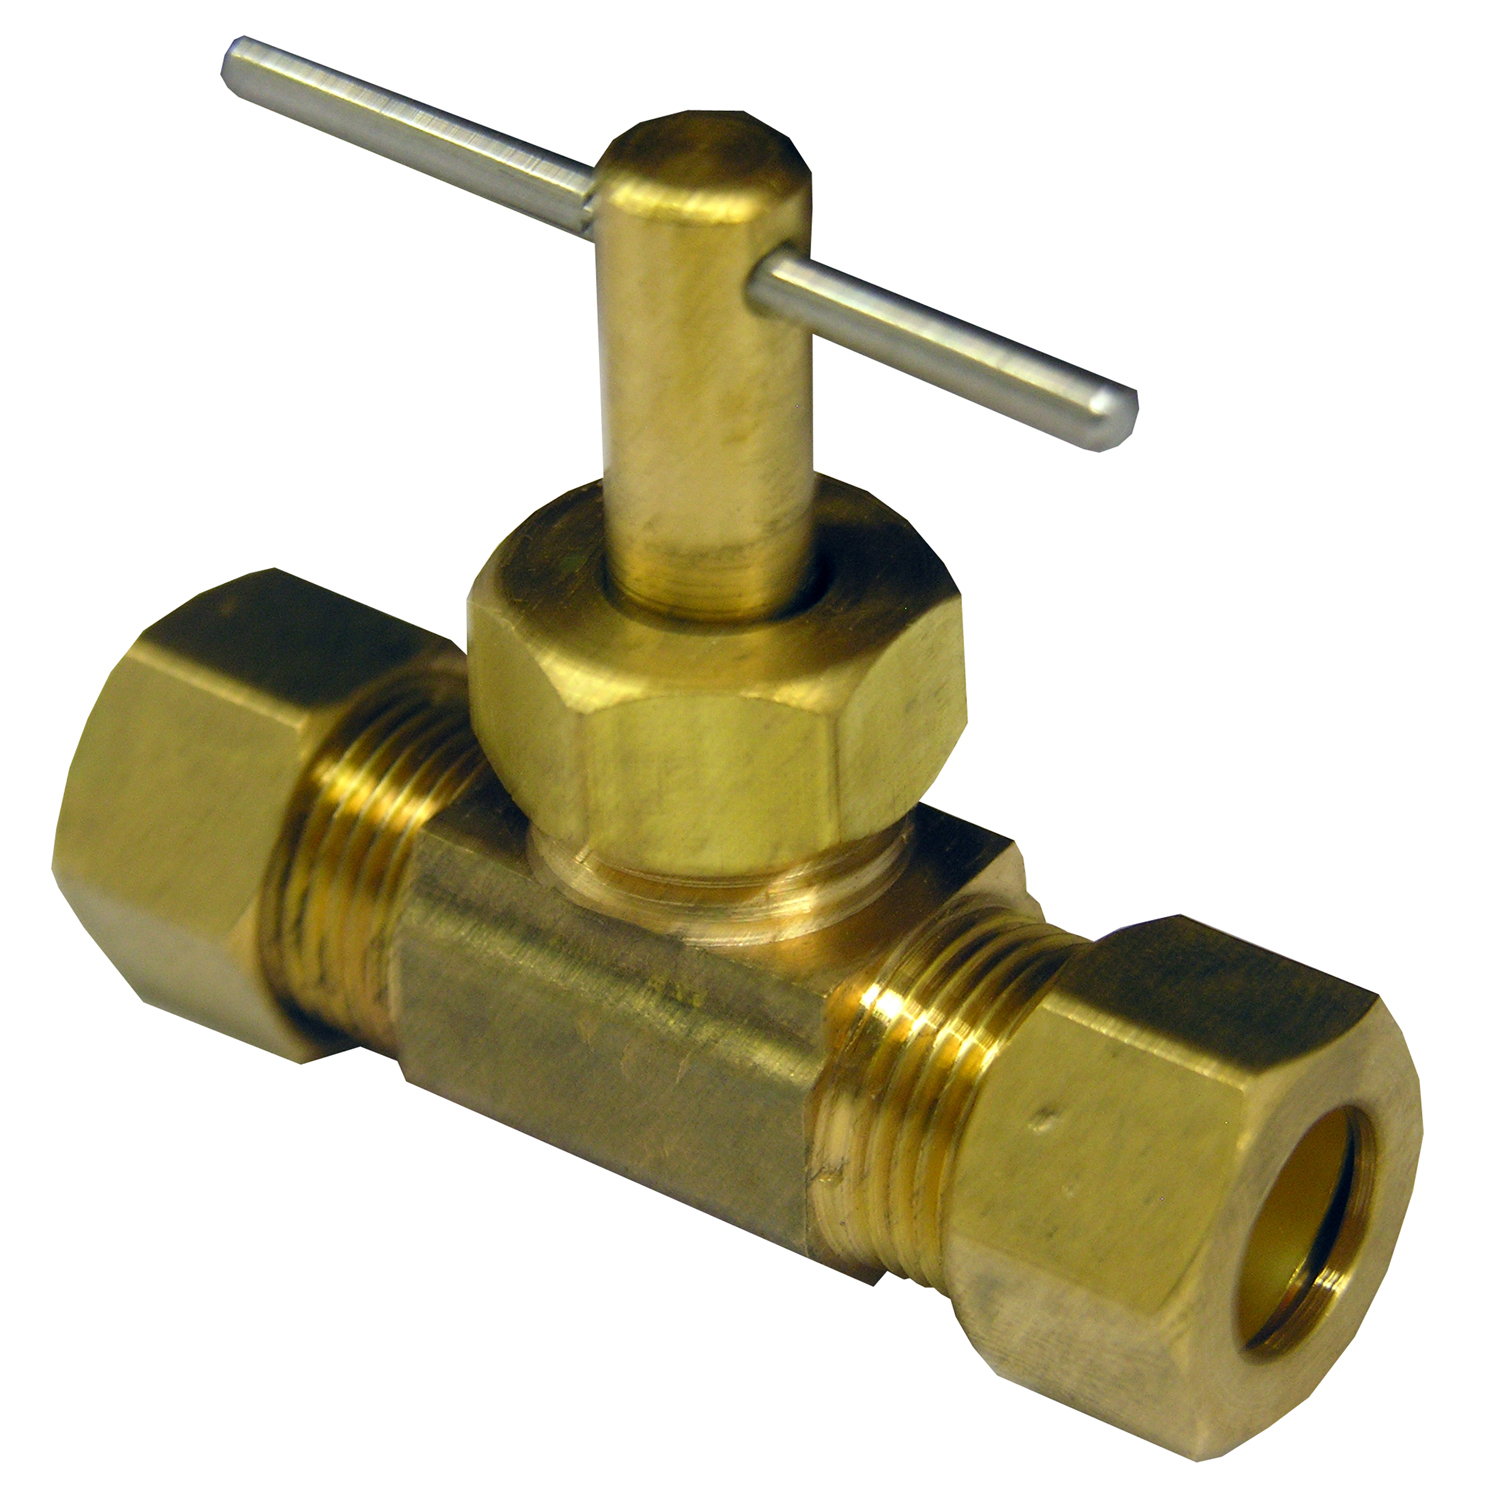 Lasco 17-1531 Straight Needle Valve, 3/8 in Connection, Compression, Brass Body